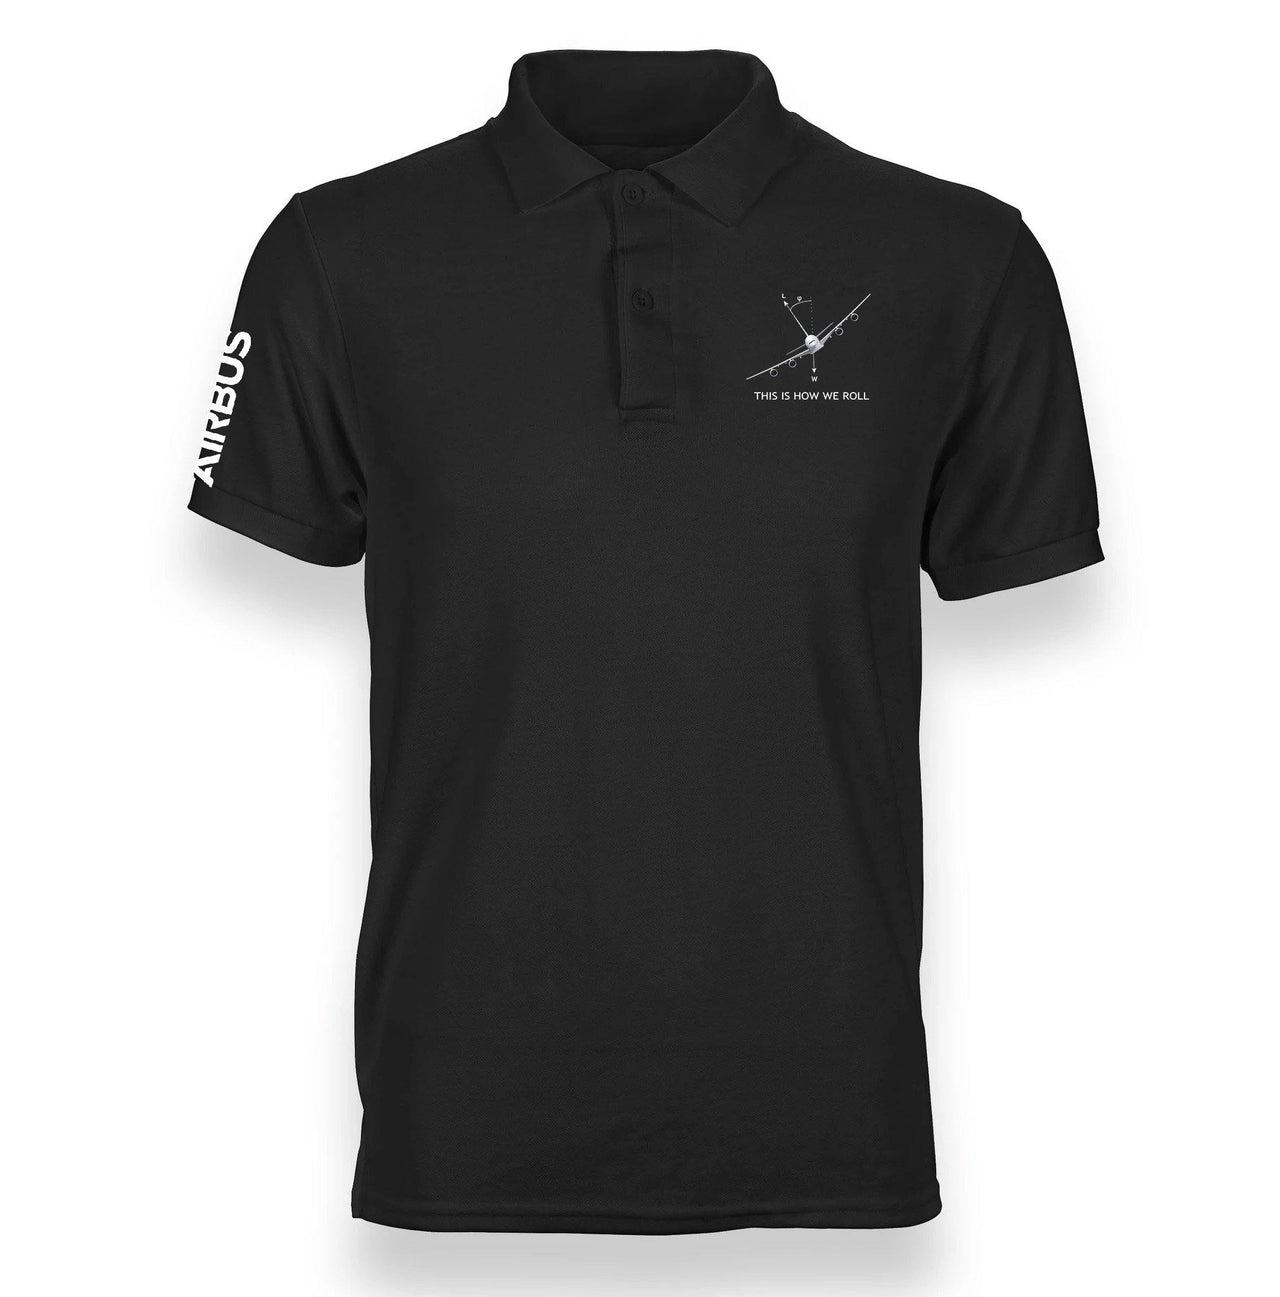 THIS IS HOW WE ROLL AIRBUS A380 DESIGNED POLO SHIRT THE AV8R